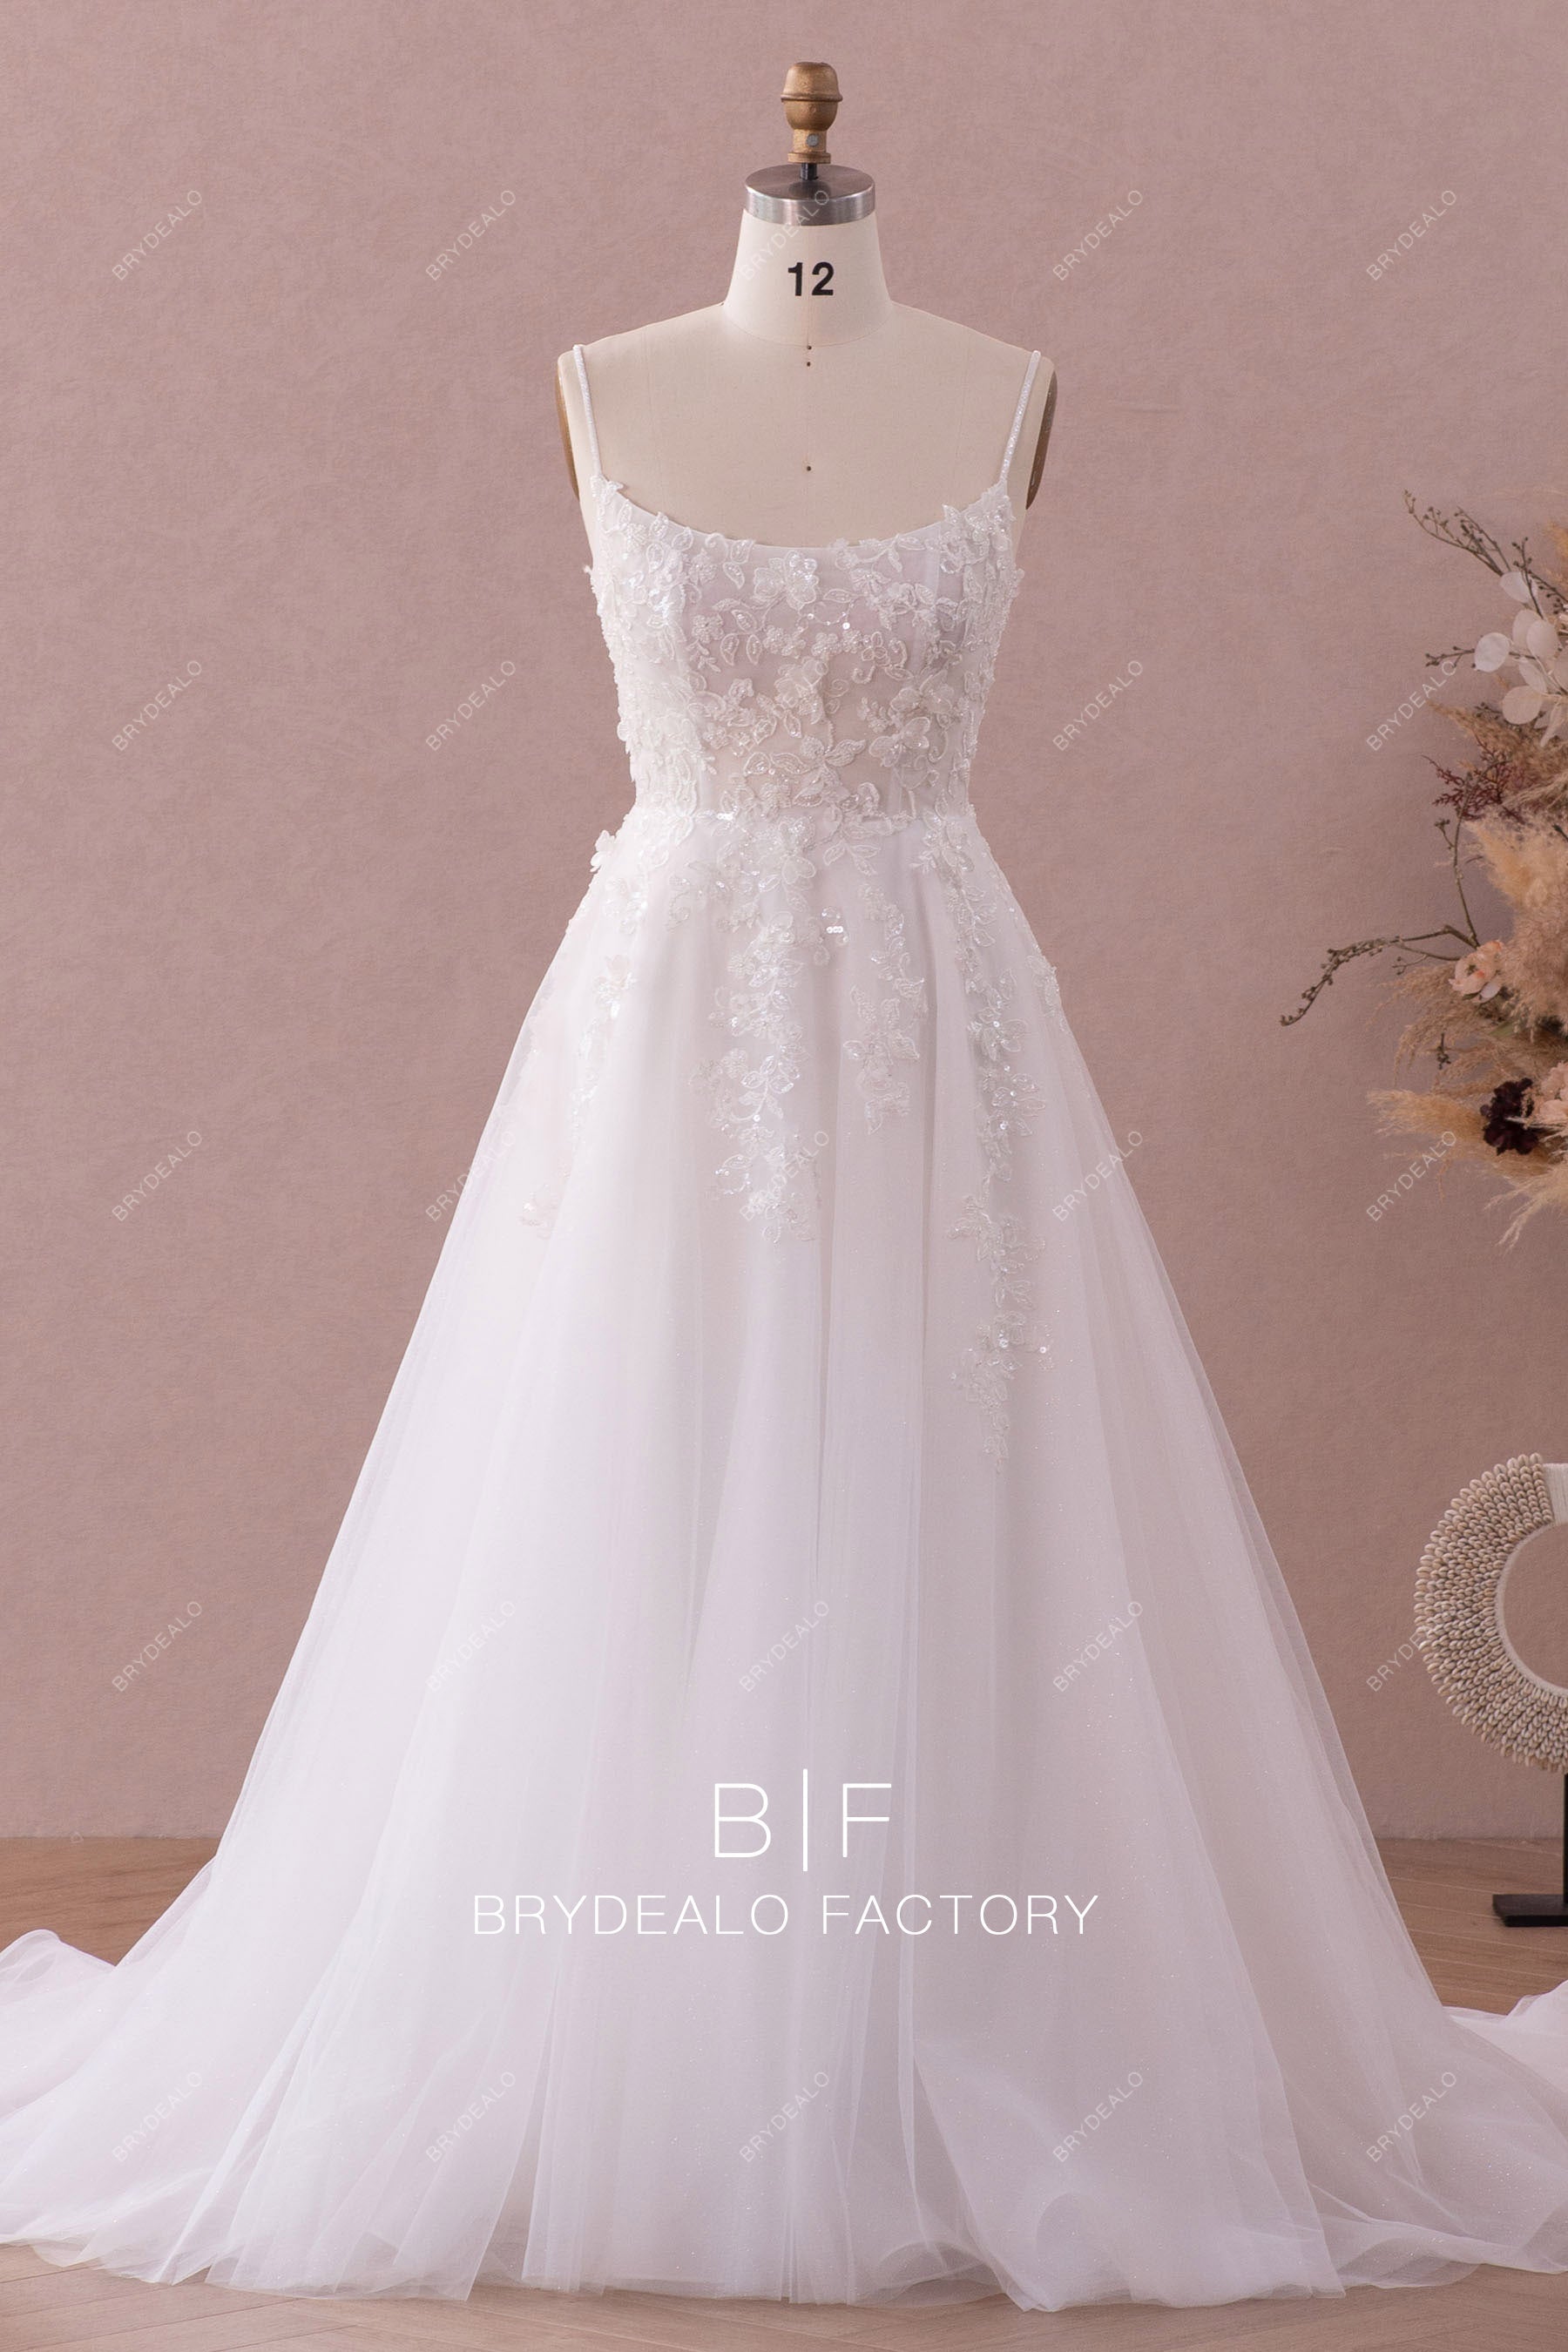 Shimmery 3D Flower Lace Spaghetti Strap Scoop Neck Bridal Dress